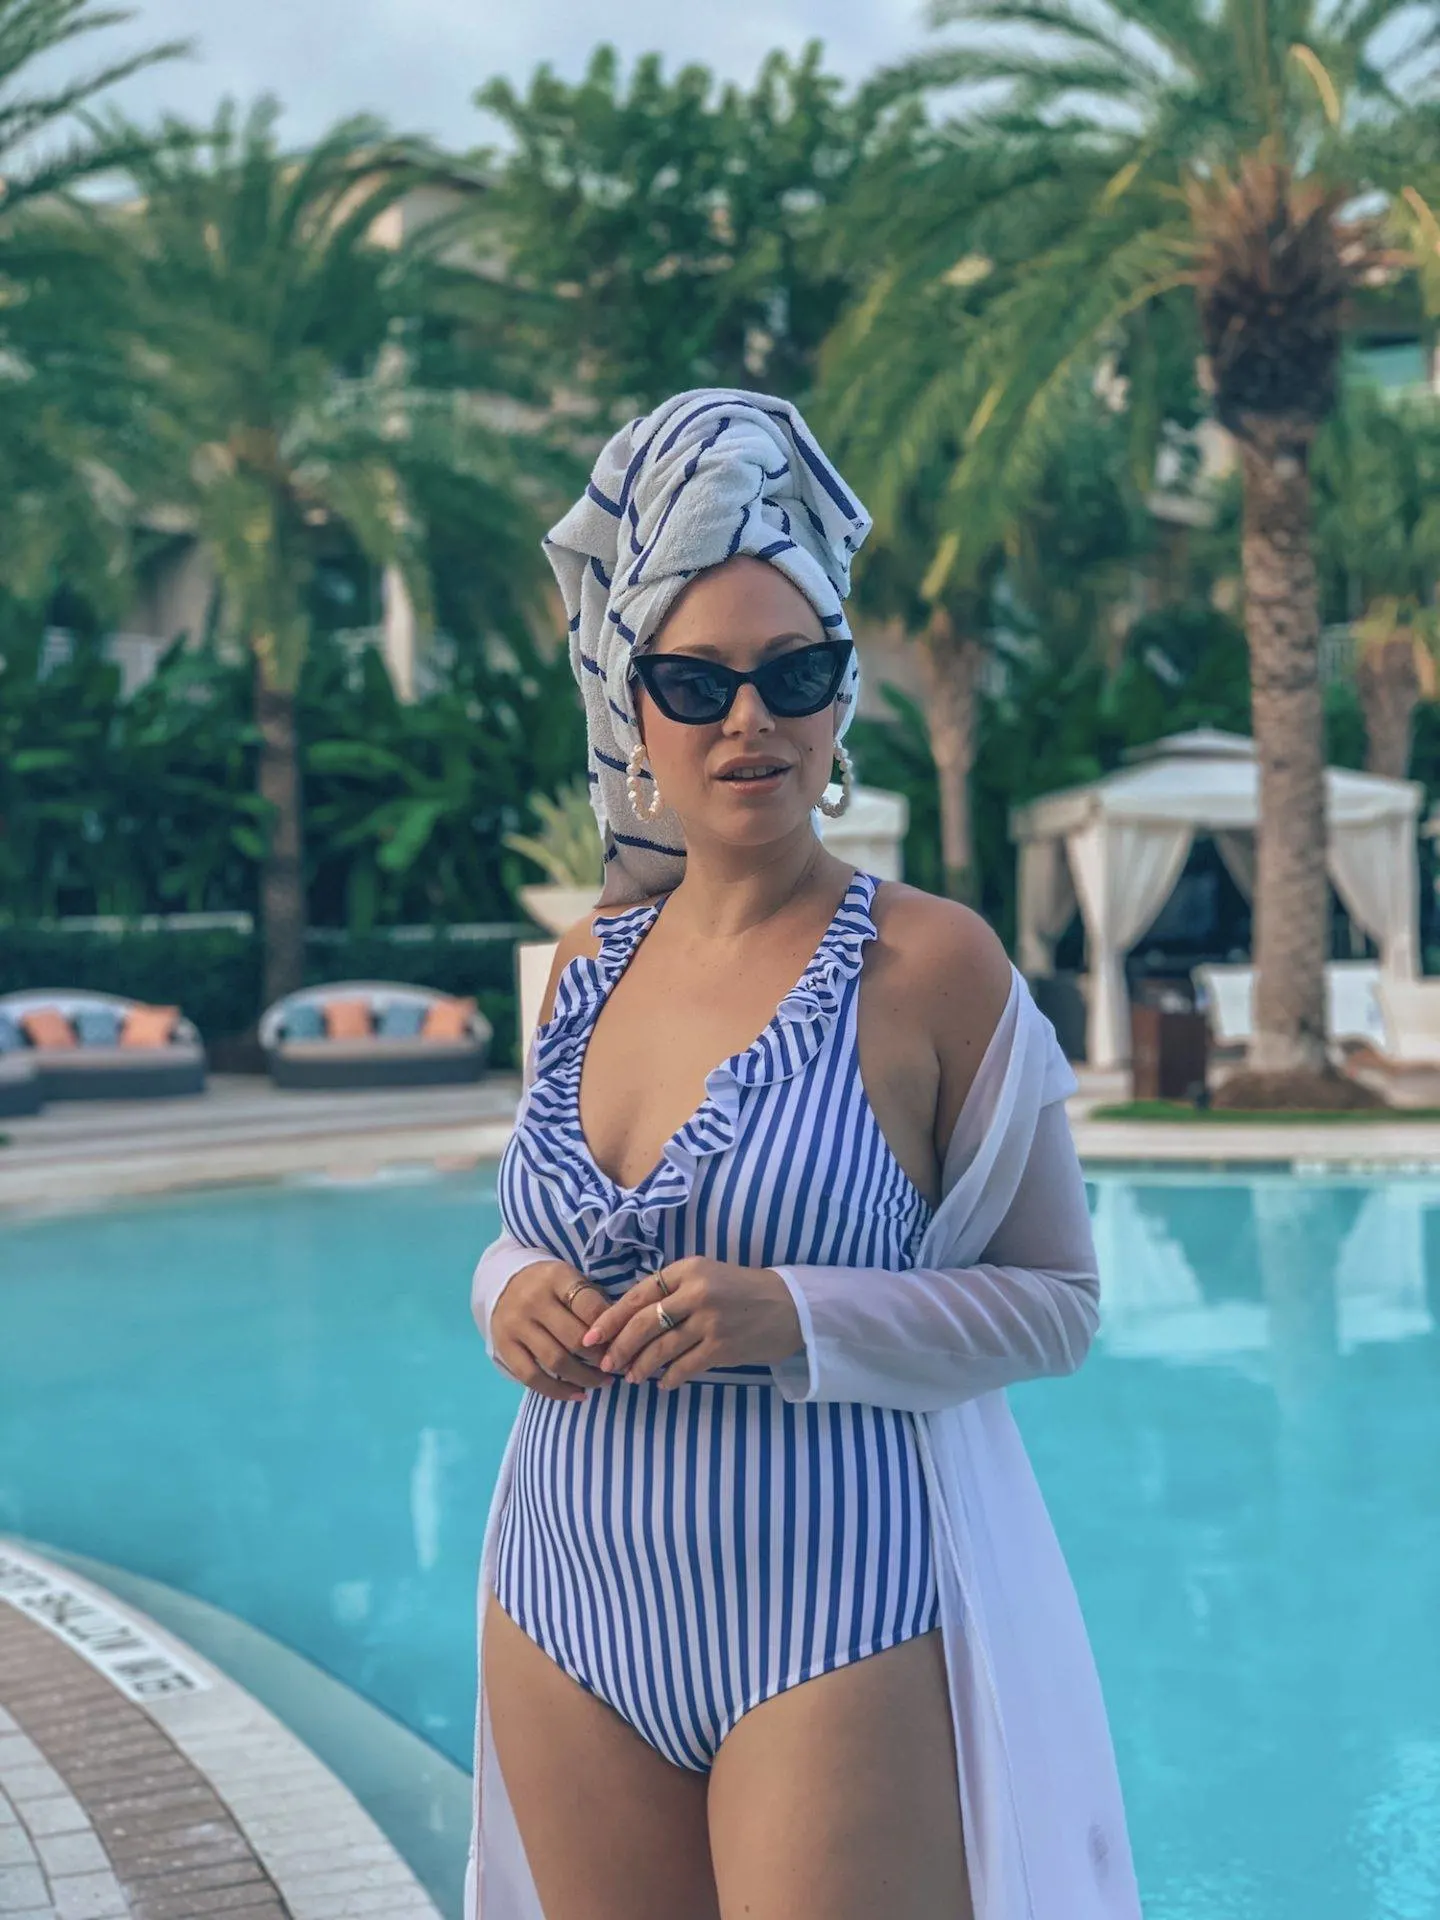 The perfect flattering swimsuit with stripes and ruffles by Cupshe. Seen here poolside in Key Largo